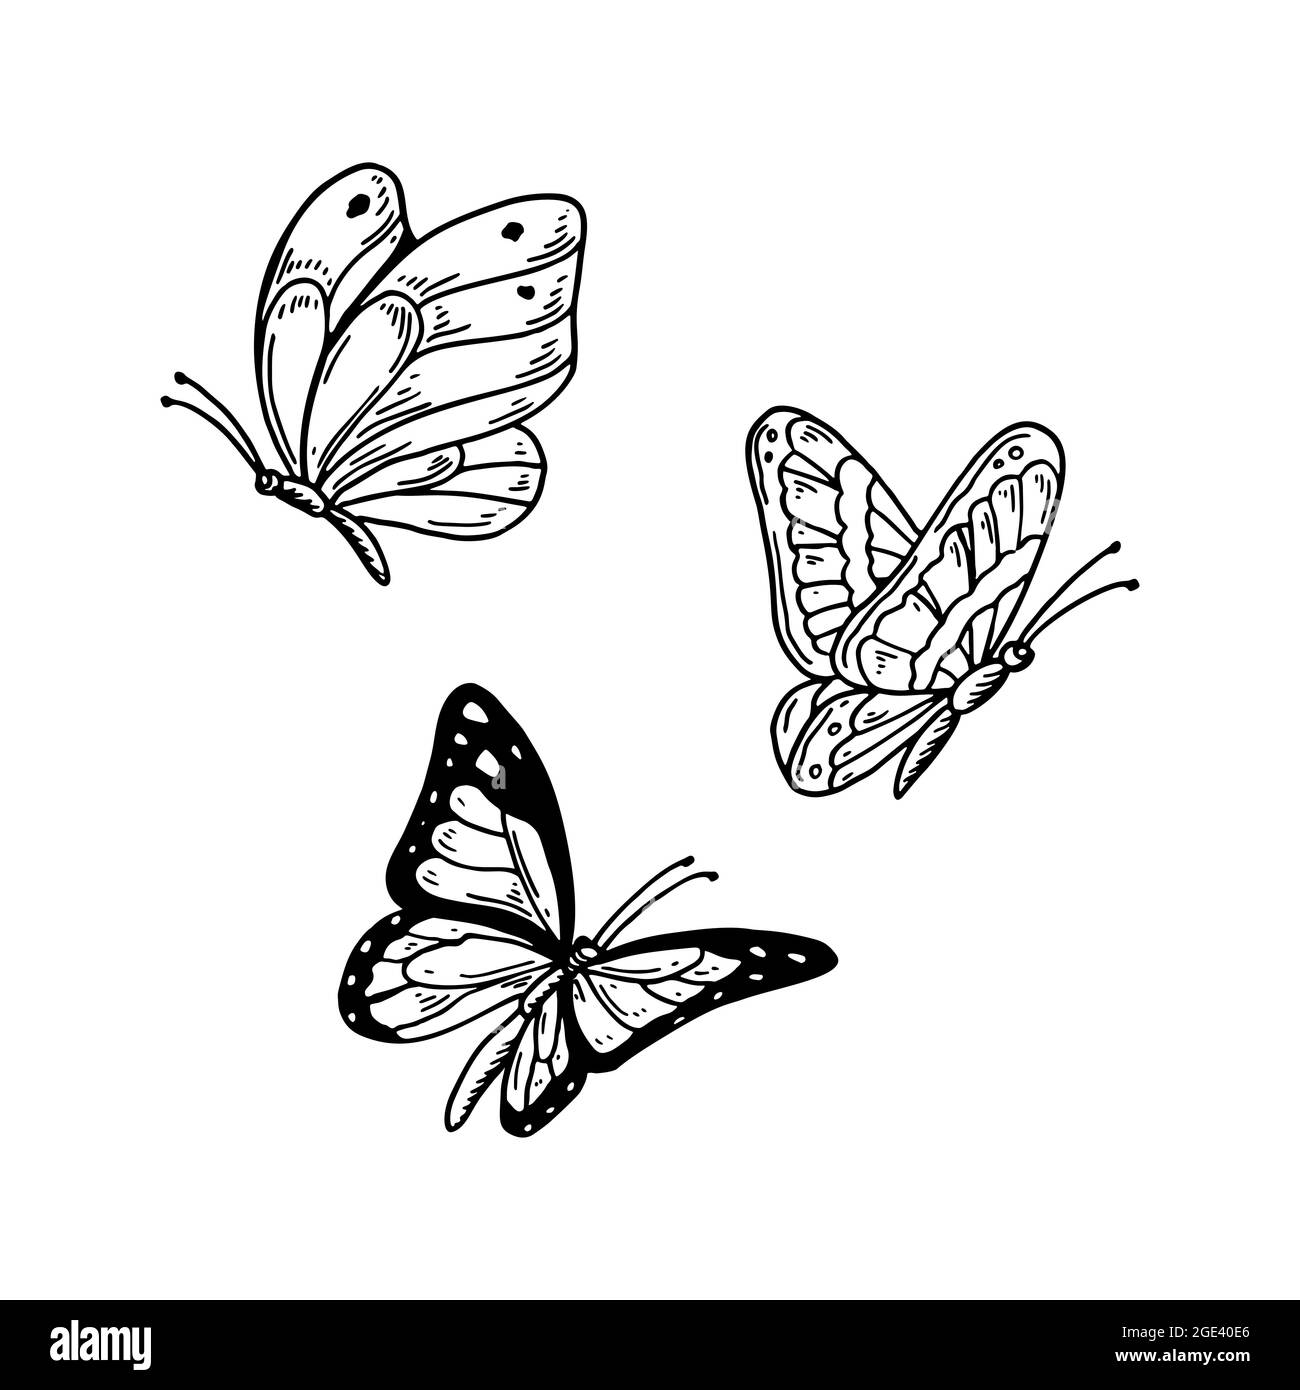 Monarch butterflies Black and White Stock Photos & Images - Alamy